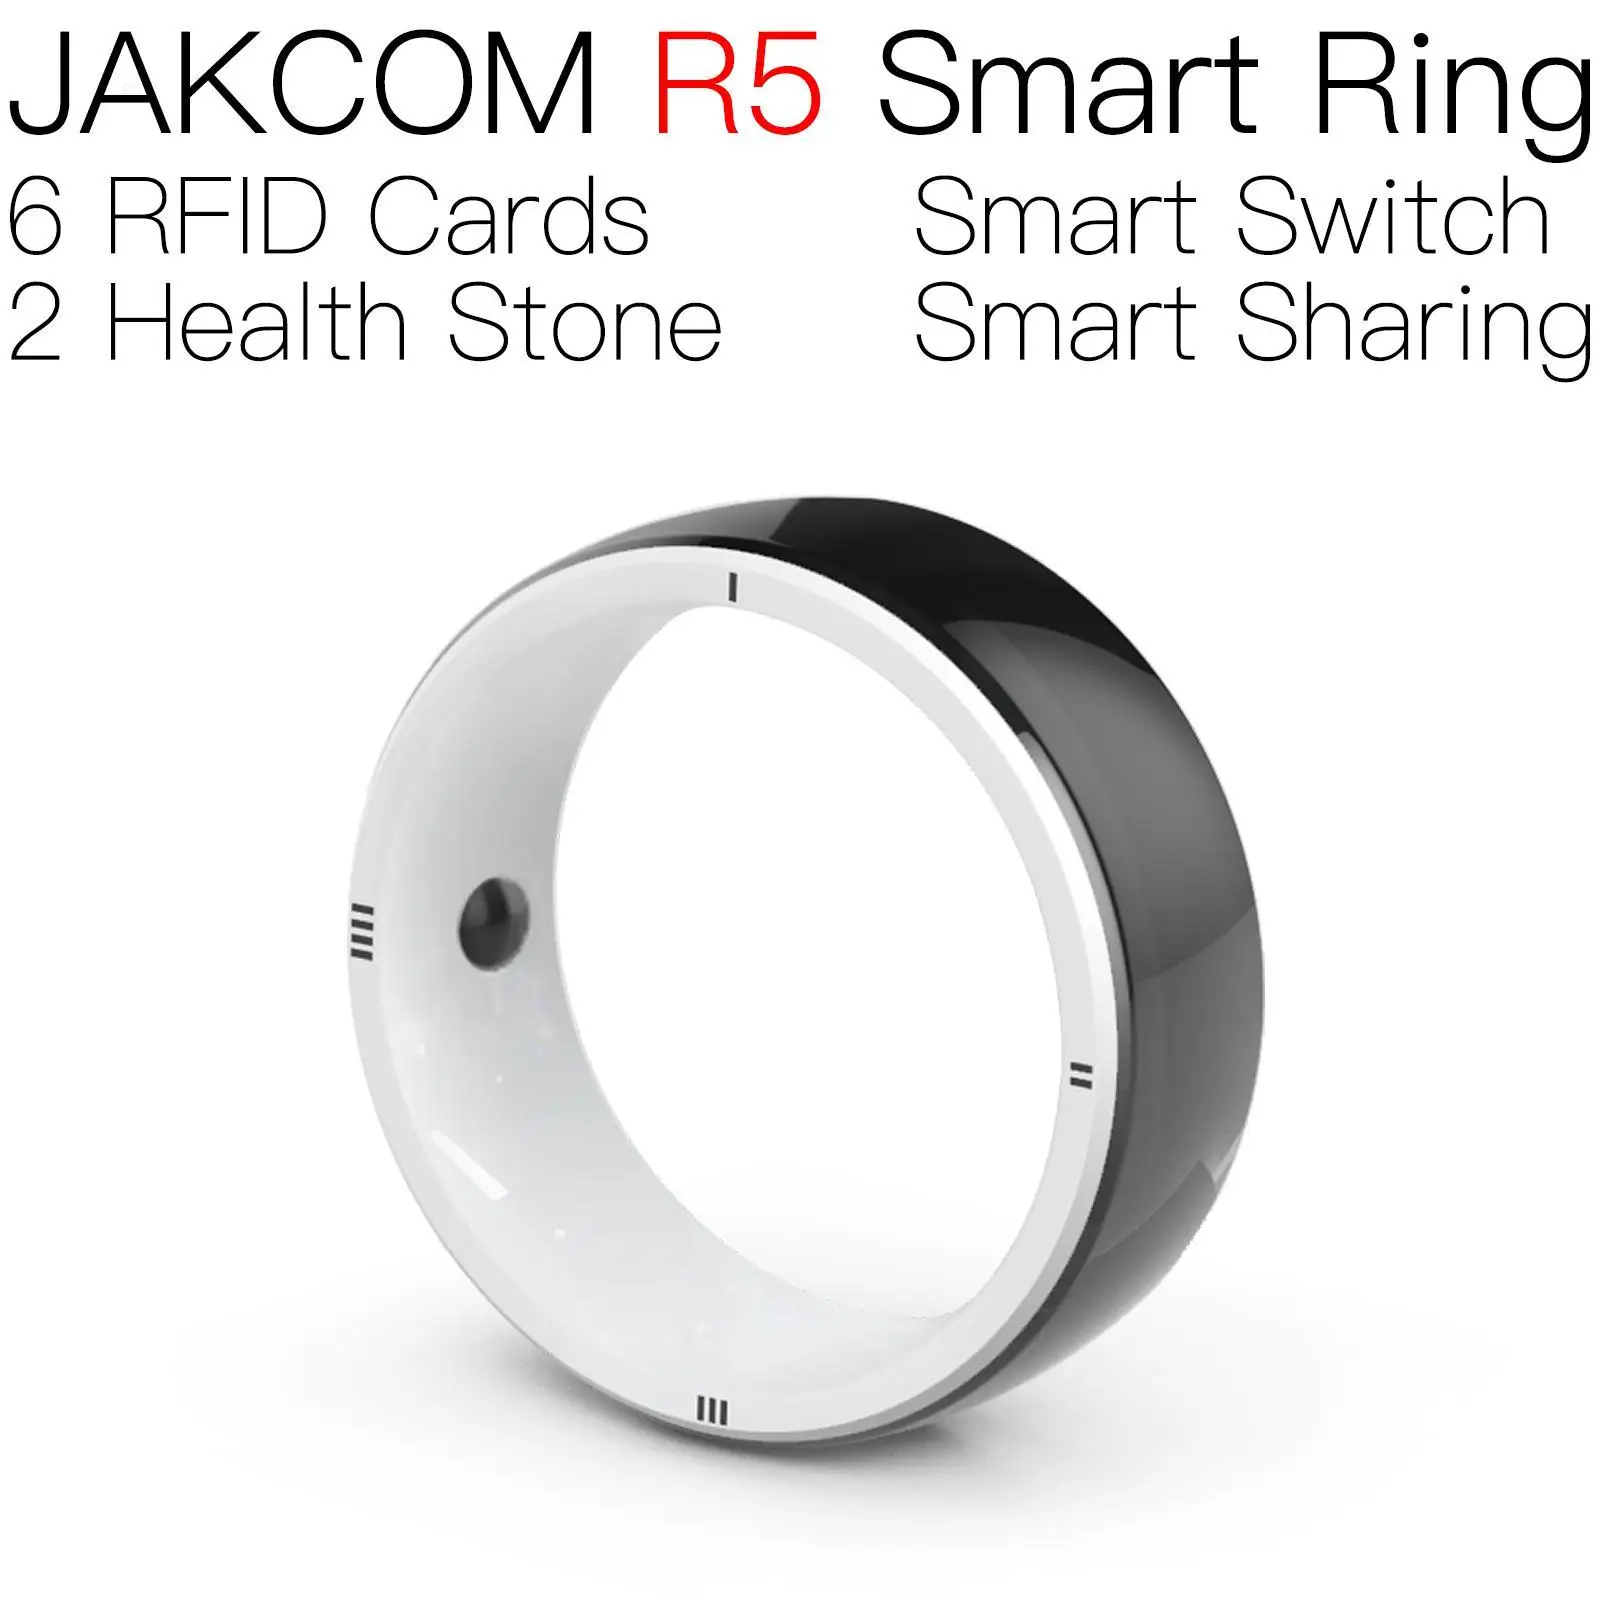 

JAKCOM R5 Smart Ring Newer than card coin rfid keyfob 125khz writable nfc multifunctional chip 1123 one time use cd cart